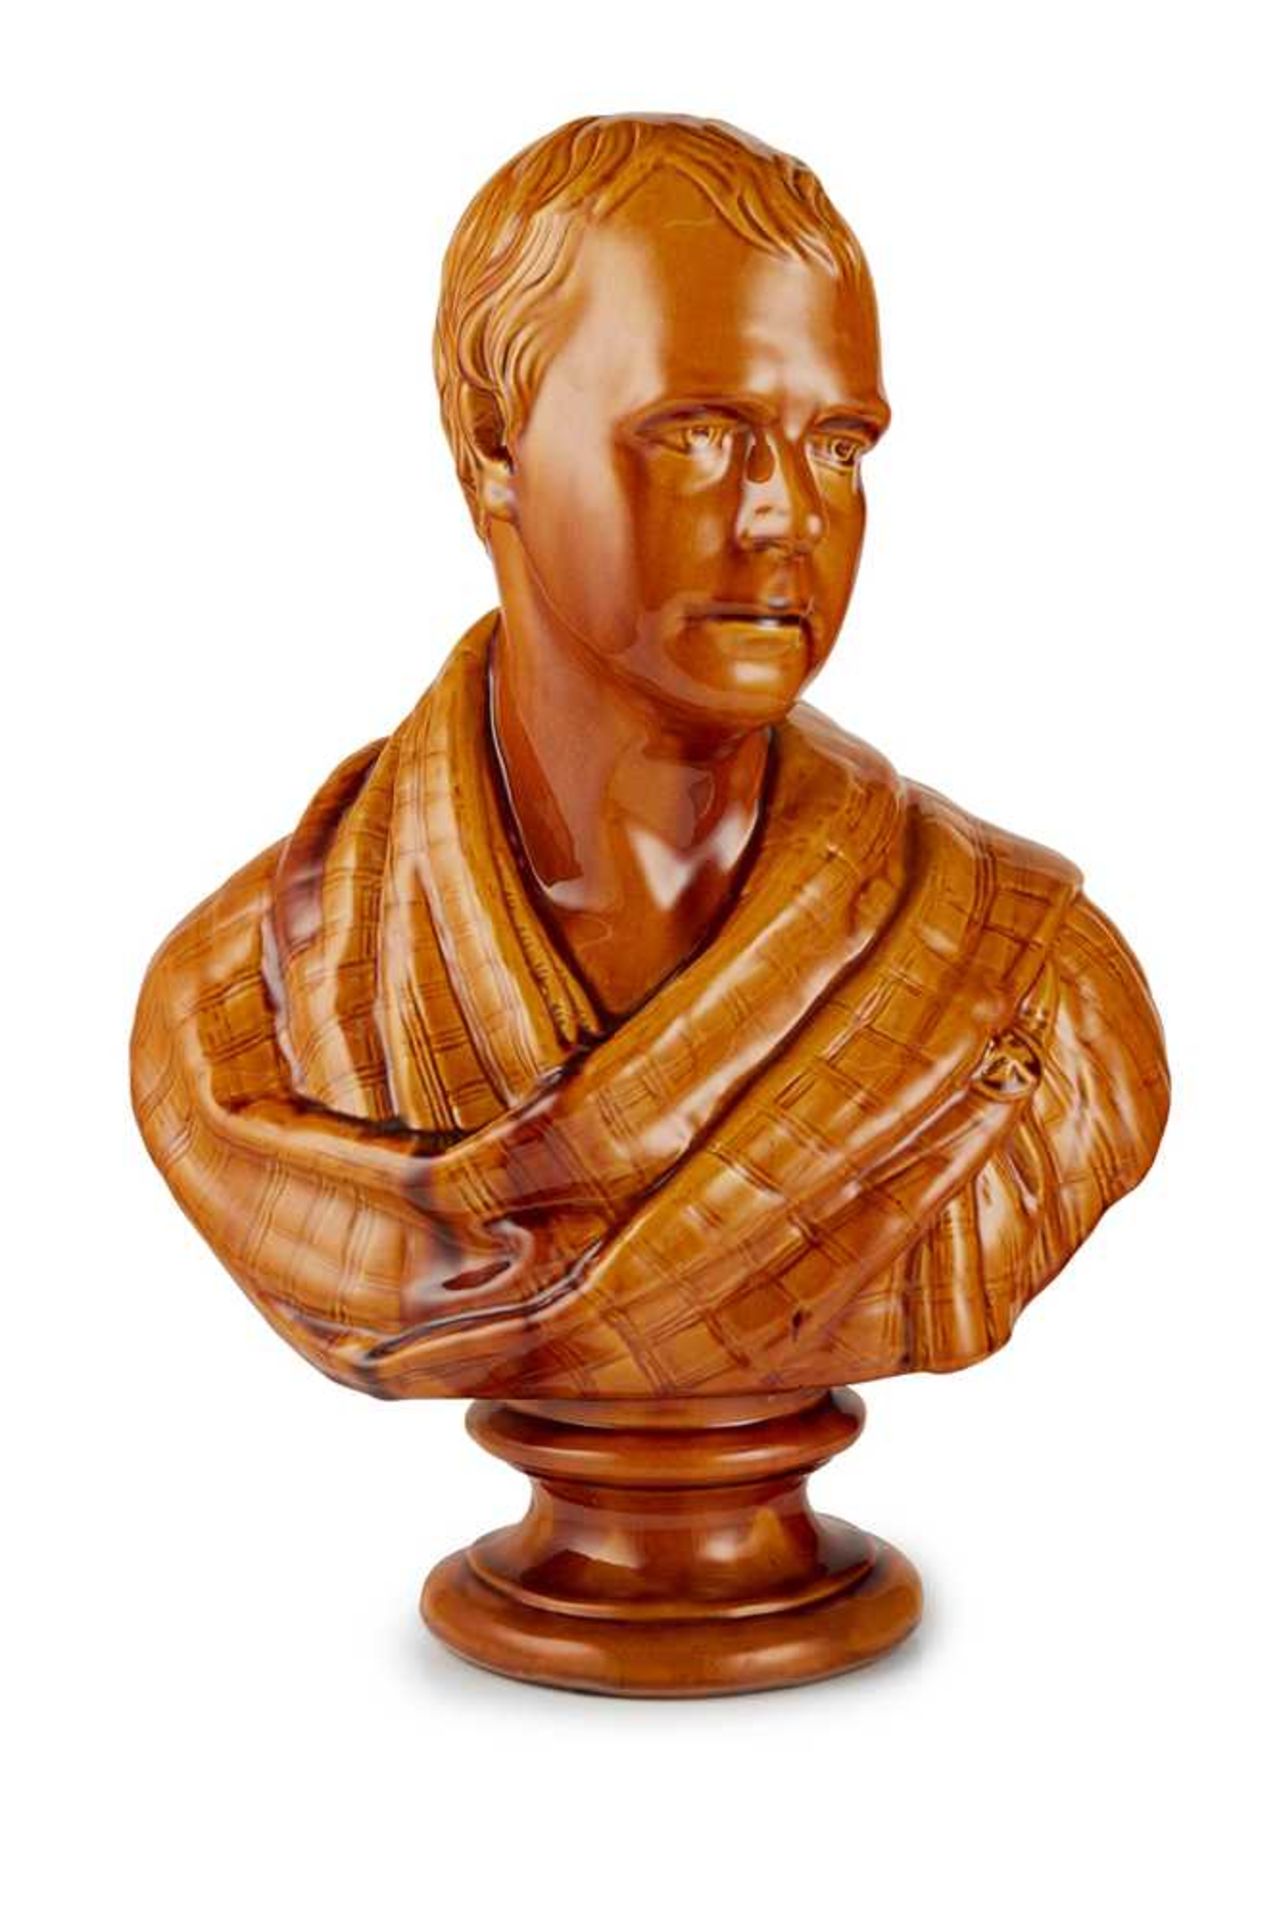 A LARGE DUNMORE POTTERY BUST OF SIR WALTER SCOTT LATE 19TH CENTURY